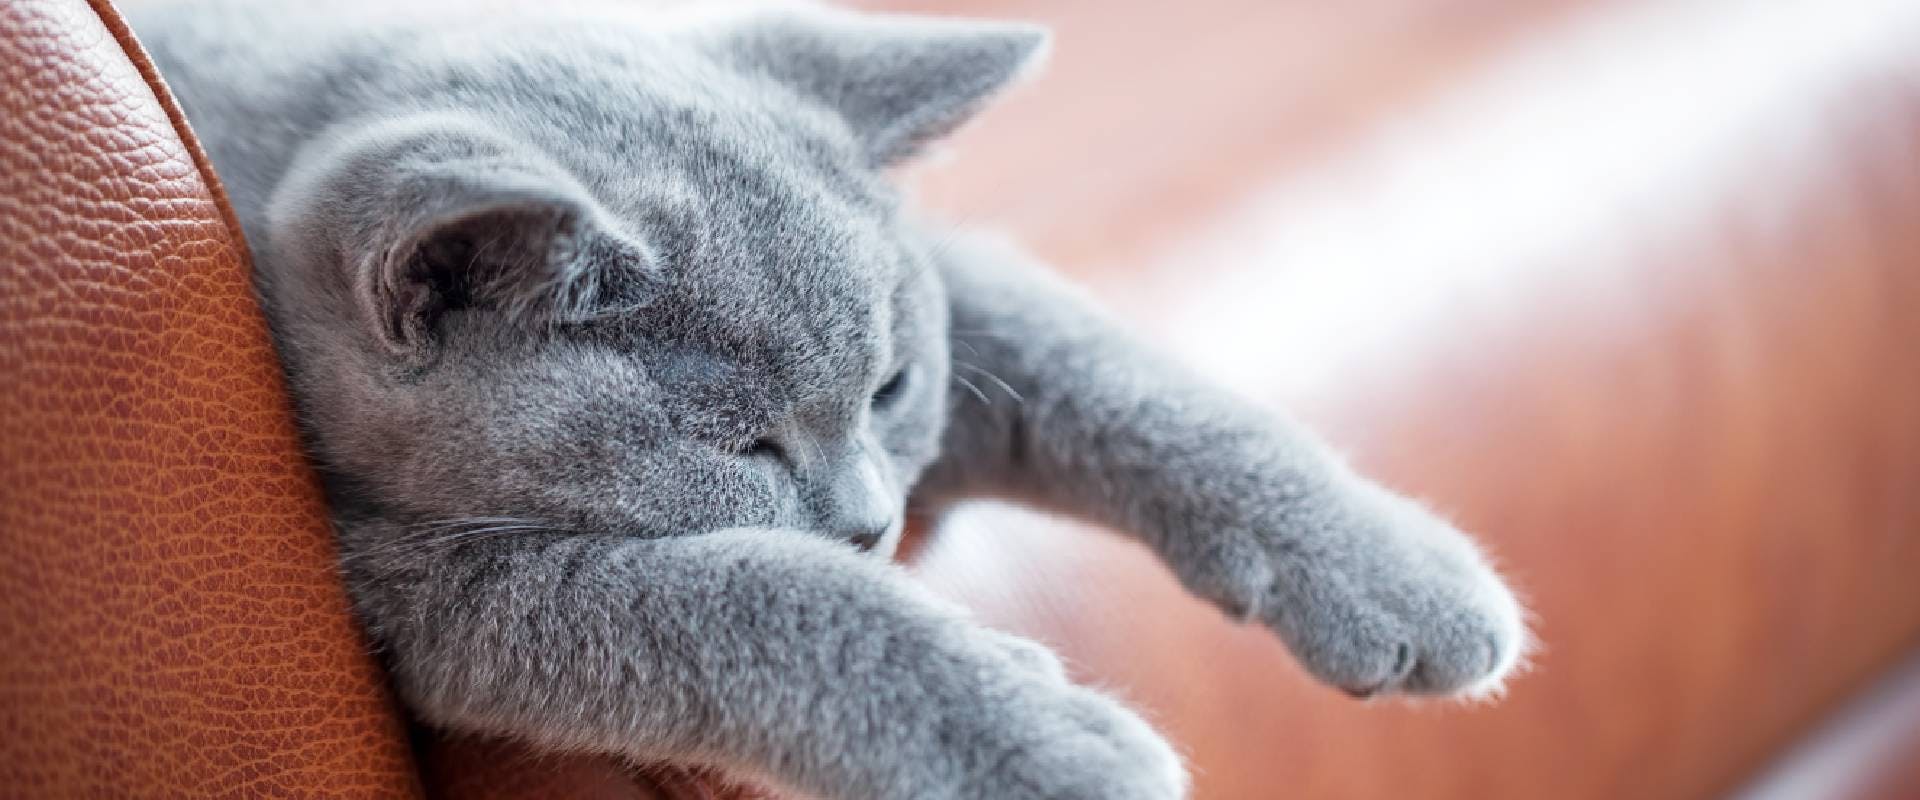 A lethargic cat with grey fur on a sofa